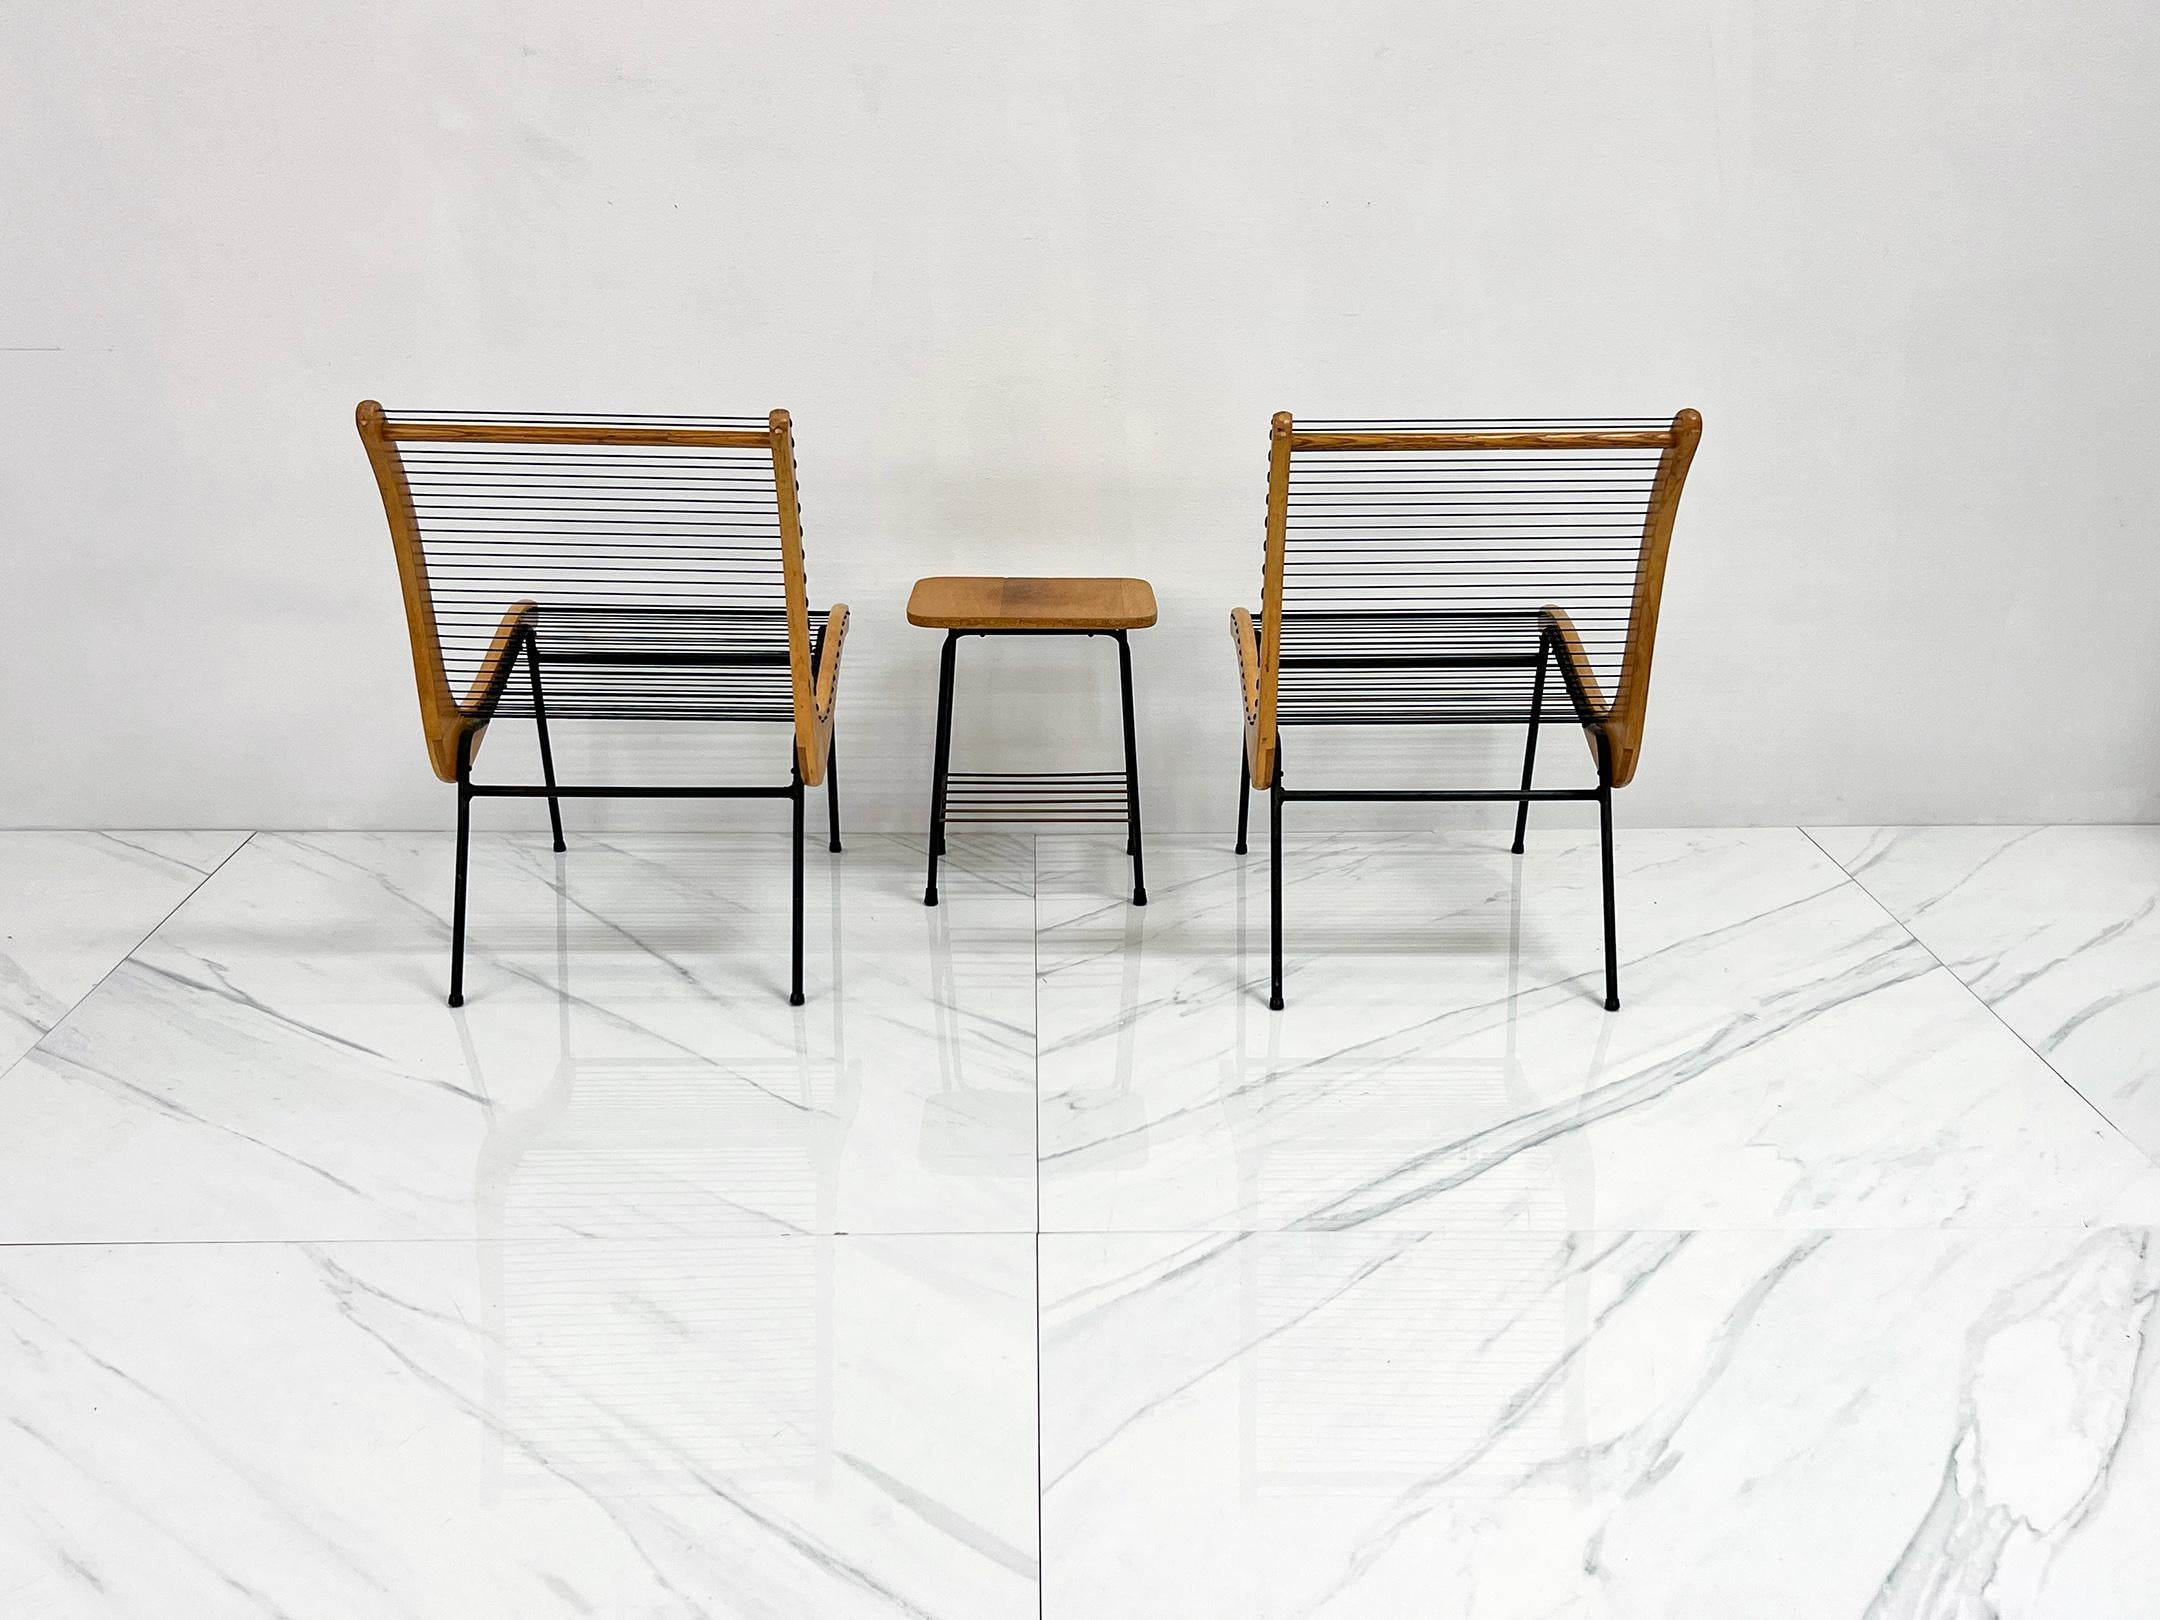 Mid-20th Century String Chairs With Matching Table by Carl Koch, Vermont Tubbs, 1950's For Sale